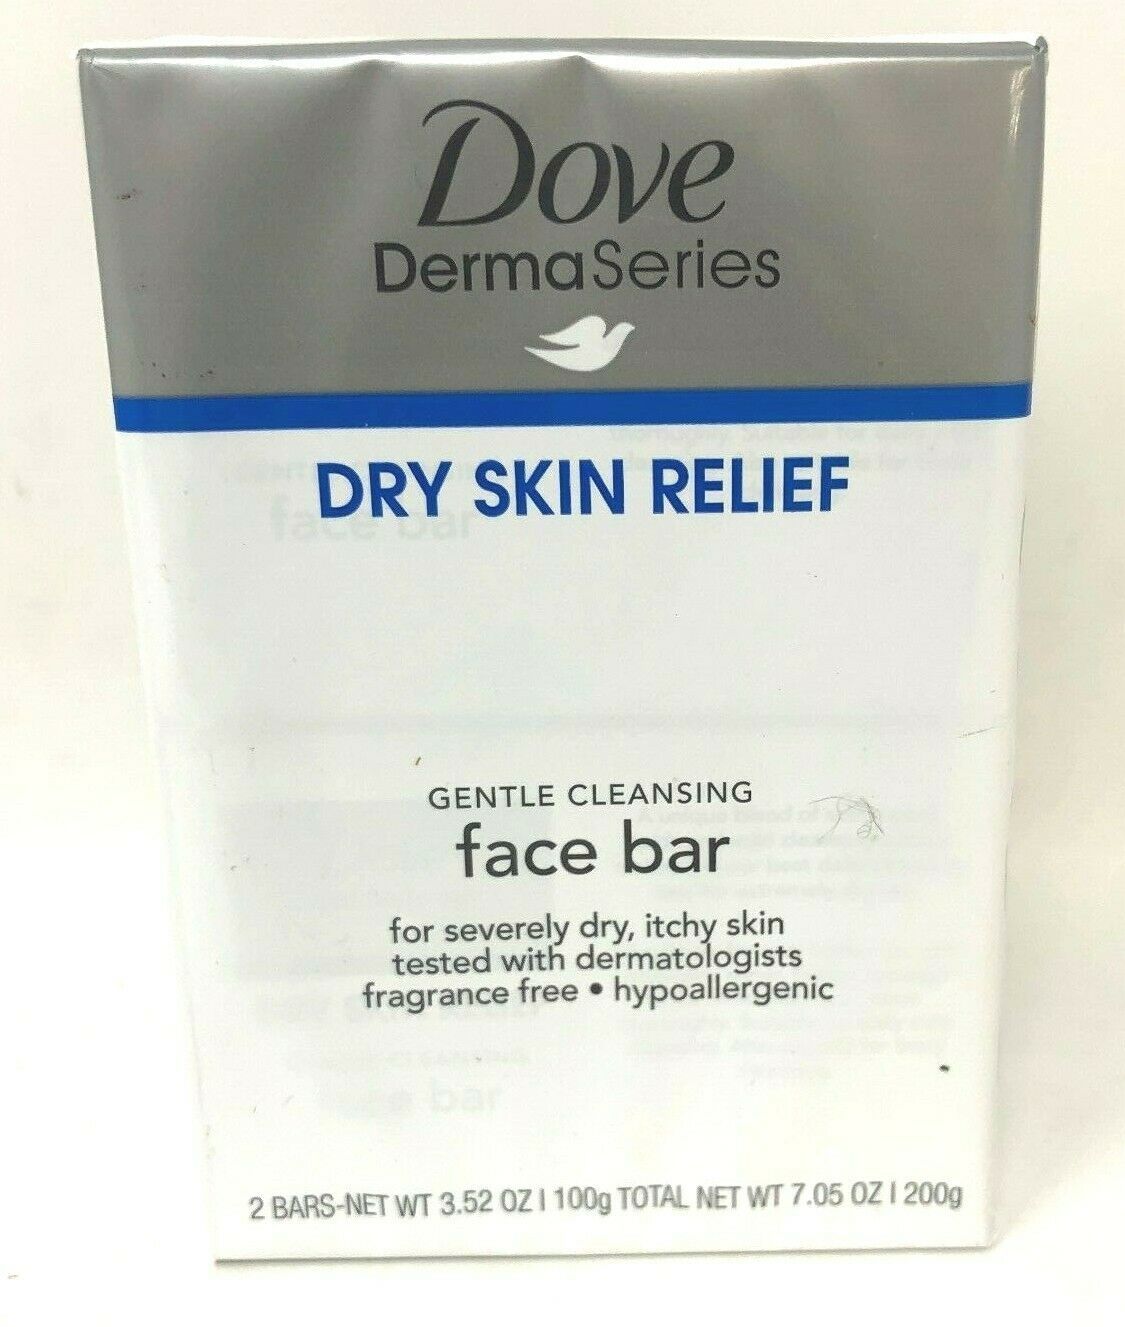 Primary image for Dove DermaSeries Dry Skin Gentle Cleansing Face Bar Soap Fragrance Free 2 bars